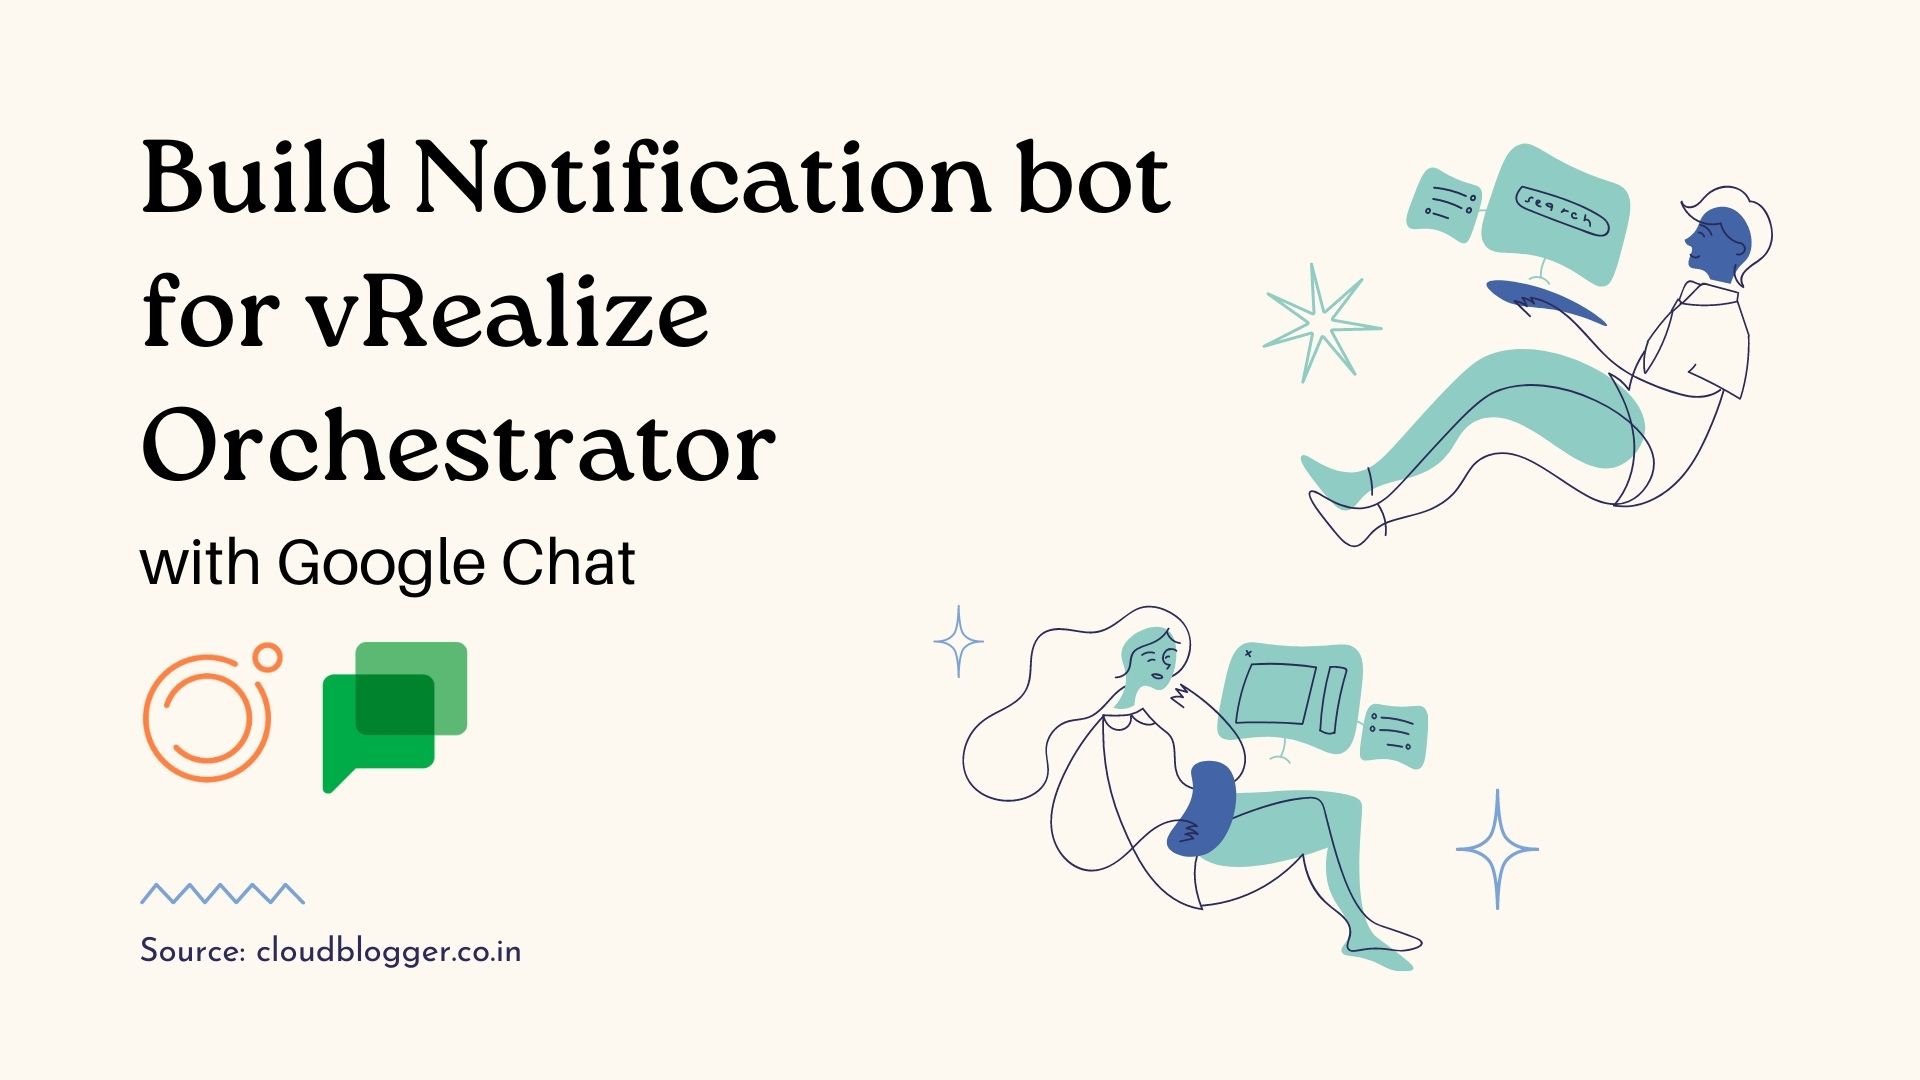 Build a Notification bot with Google Chat for vRealize Orchestrator